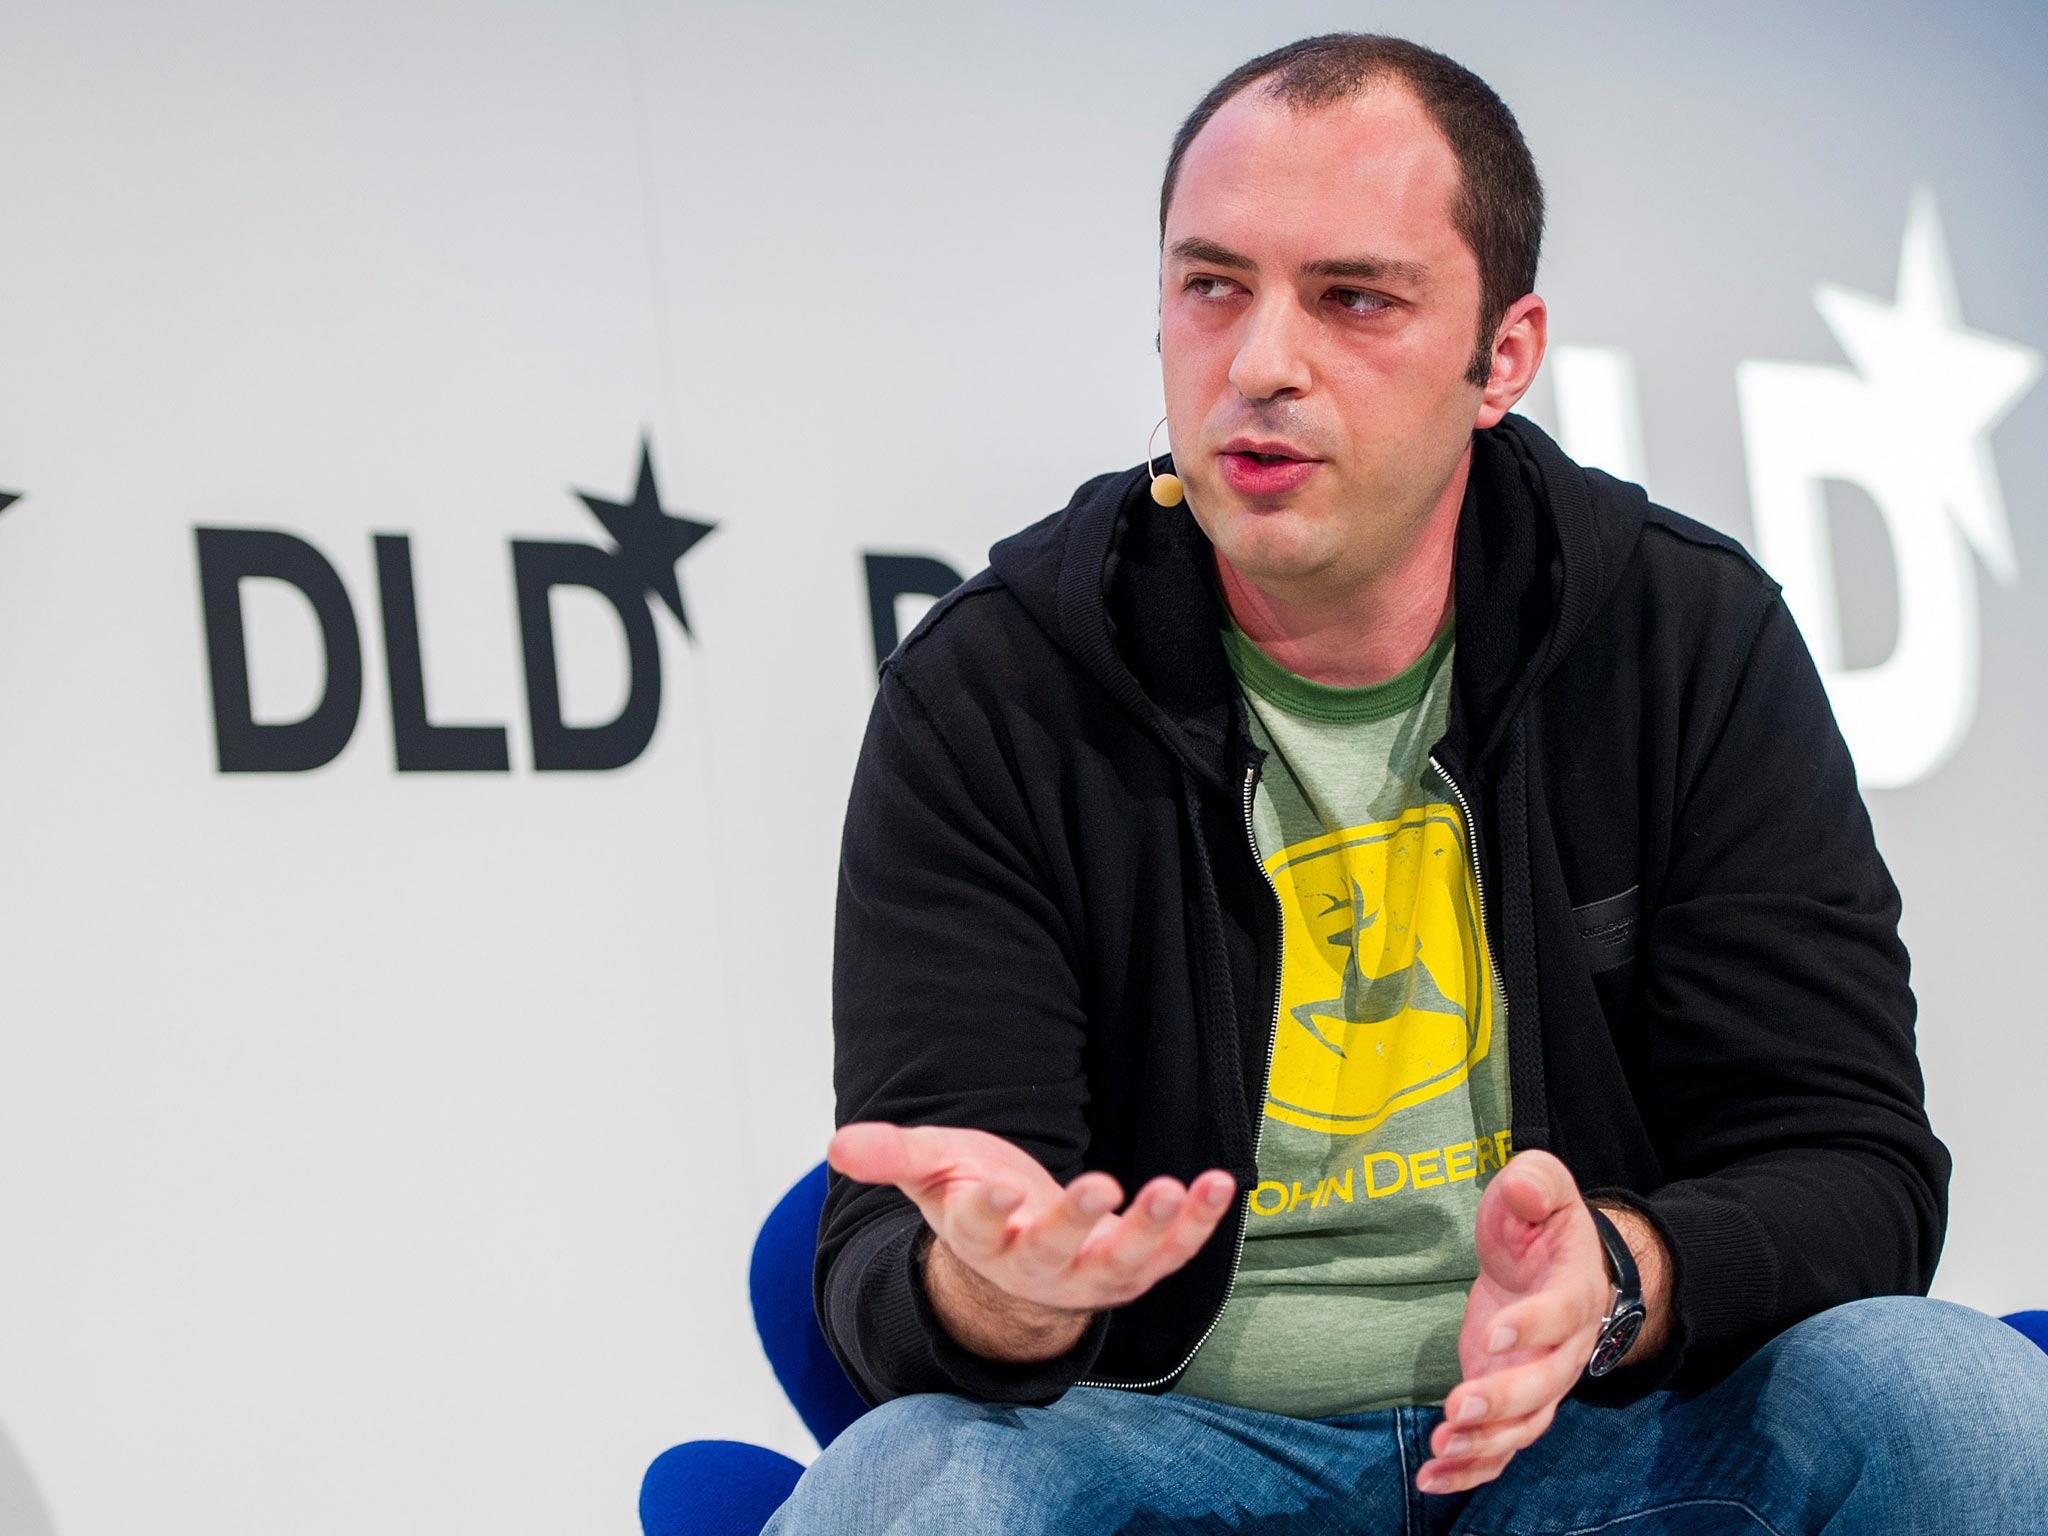 Jan Koum chose to sign the Facebook deal near the Social Services office where he used to collect food stamps